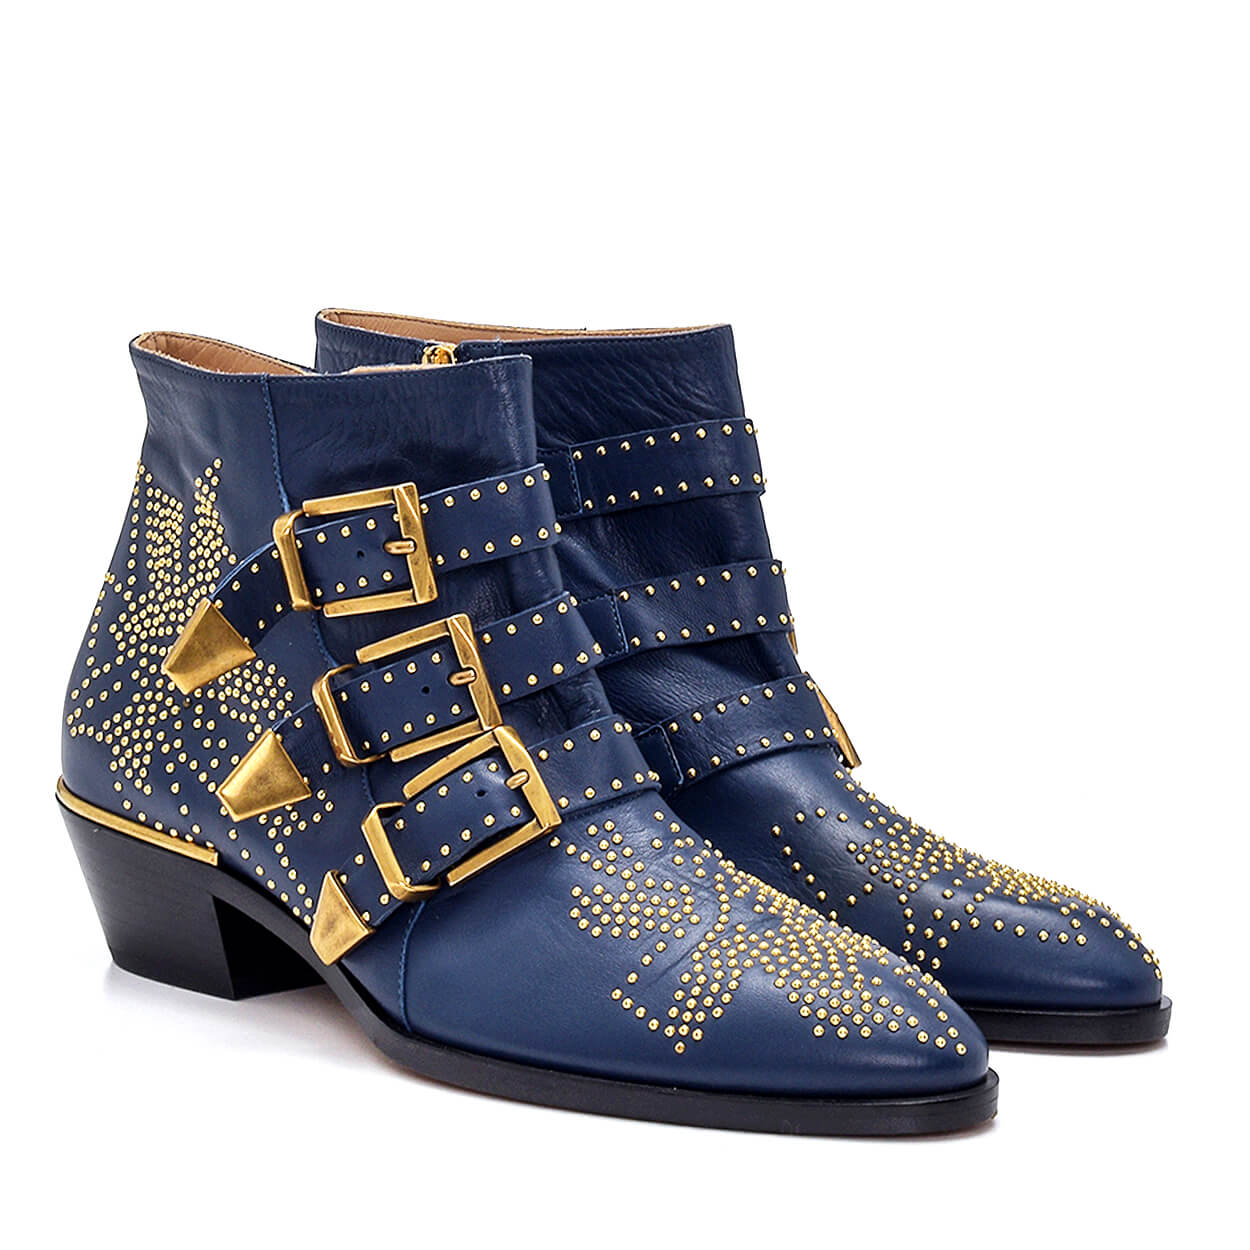 CHLOE - Navy Smooth Nappa Leather Strapped & Studded Susanna Boots